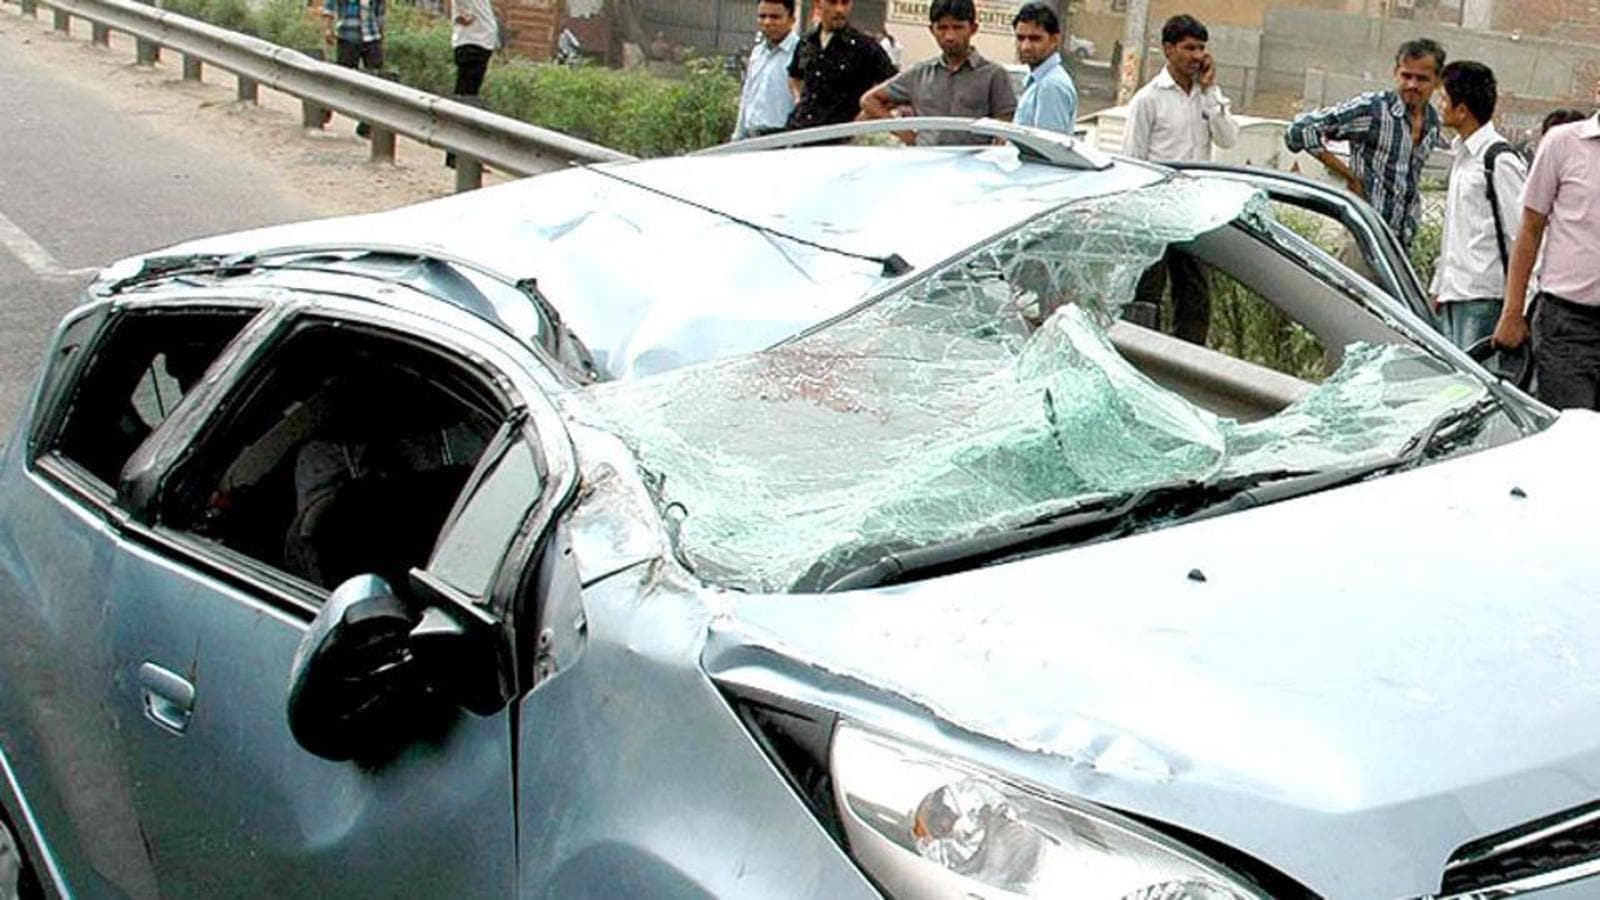 Potholes sparked over 3,500 road accidents last year: Govt tells Parliament